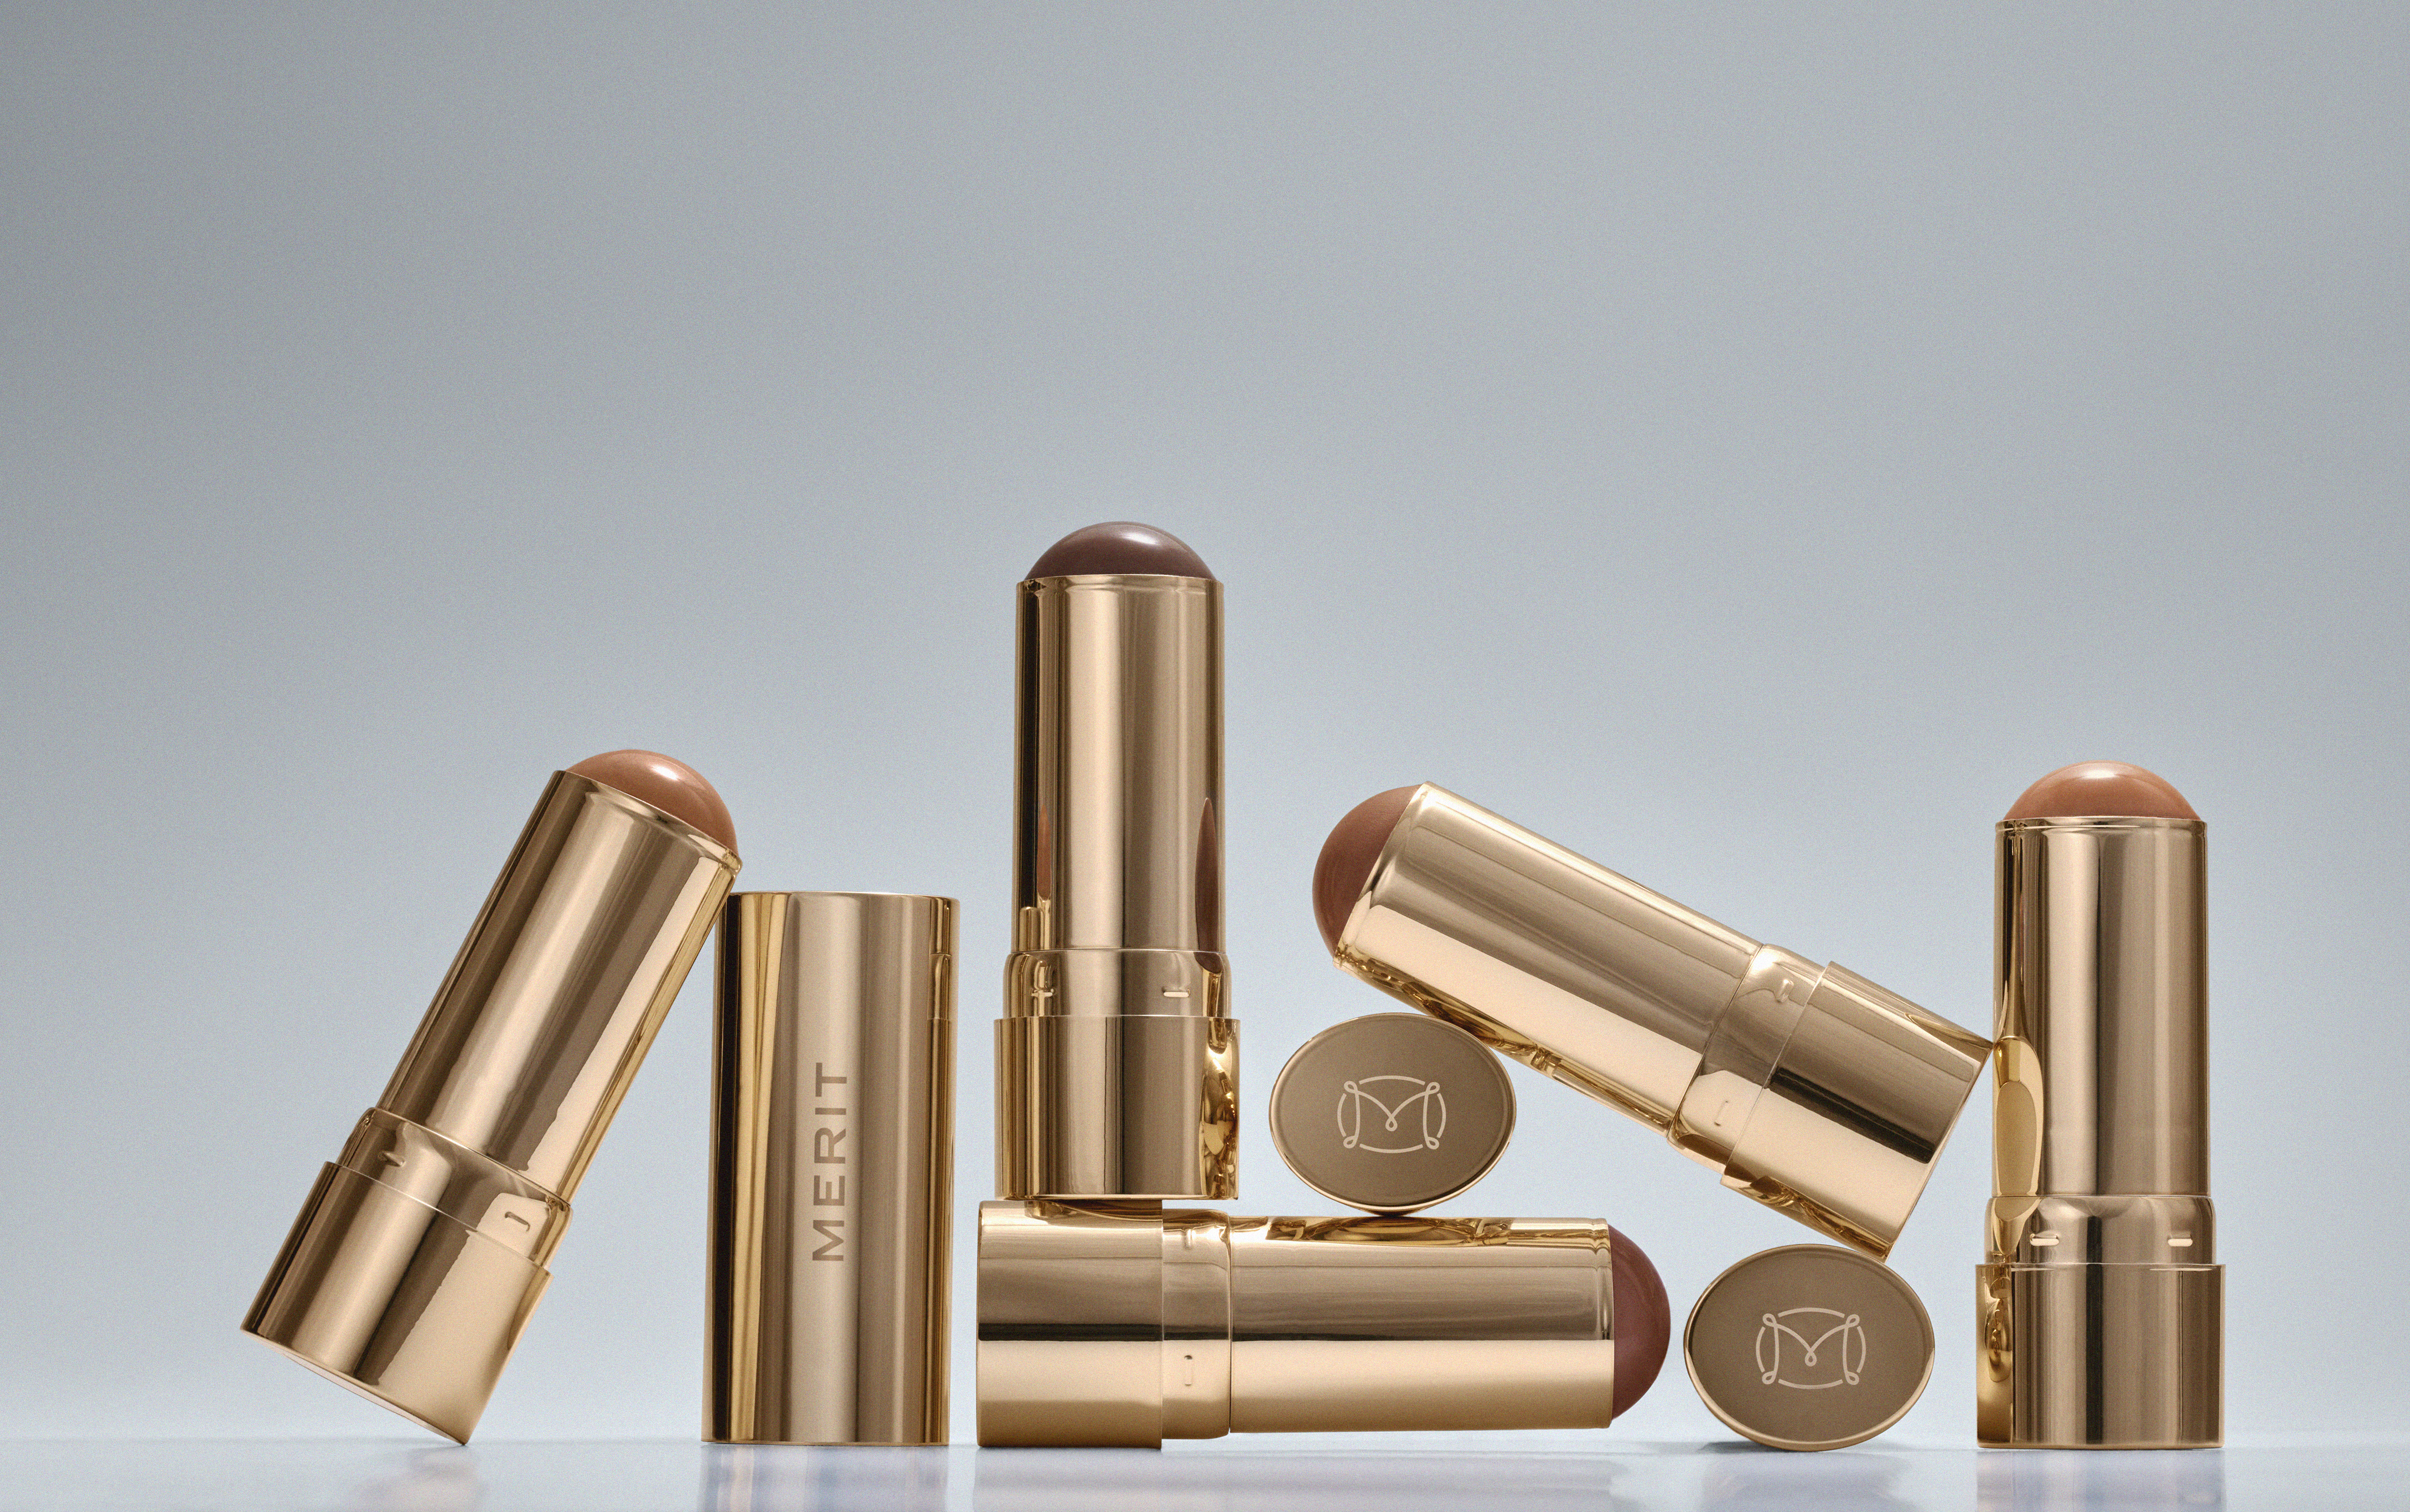 Bronze Balm by MERIT comes in an easy to apply roll-on stick